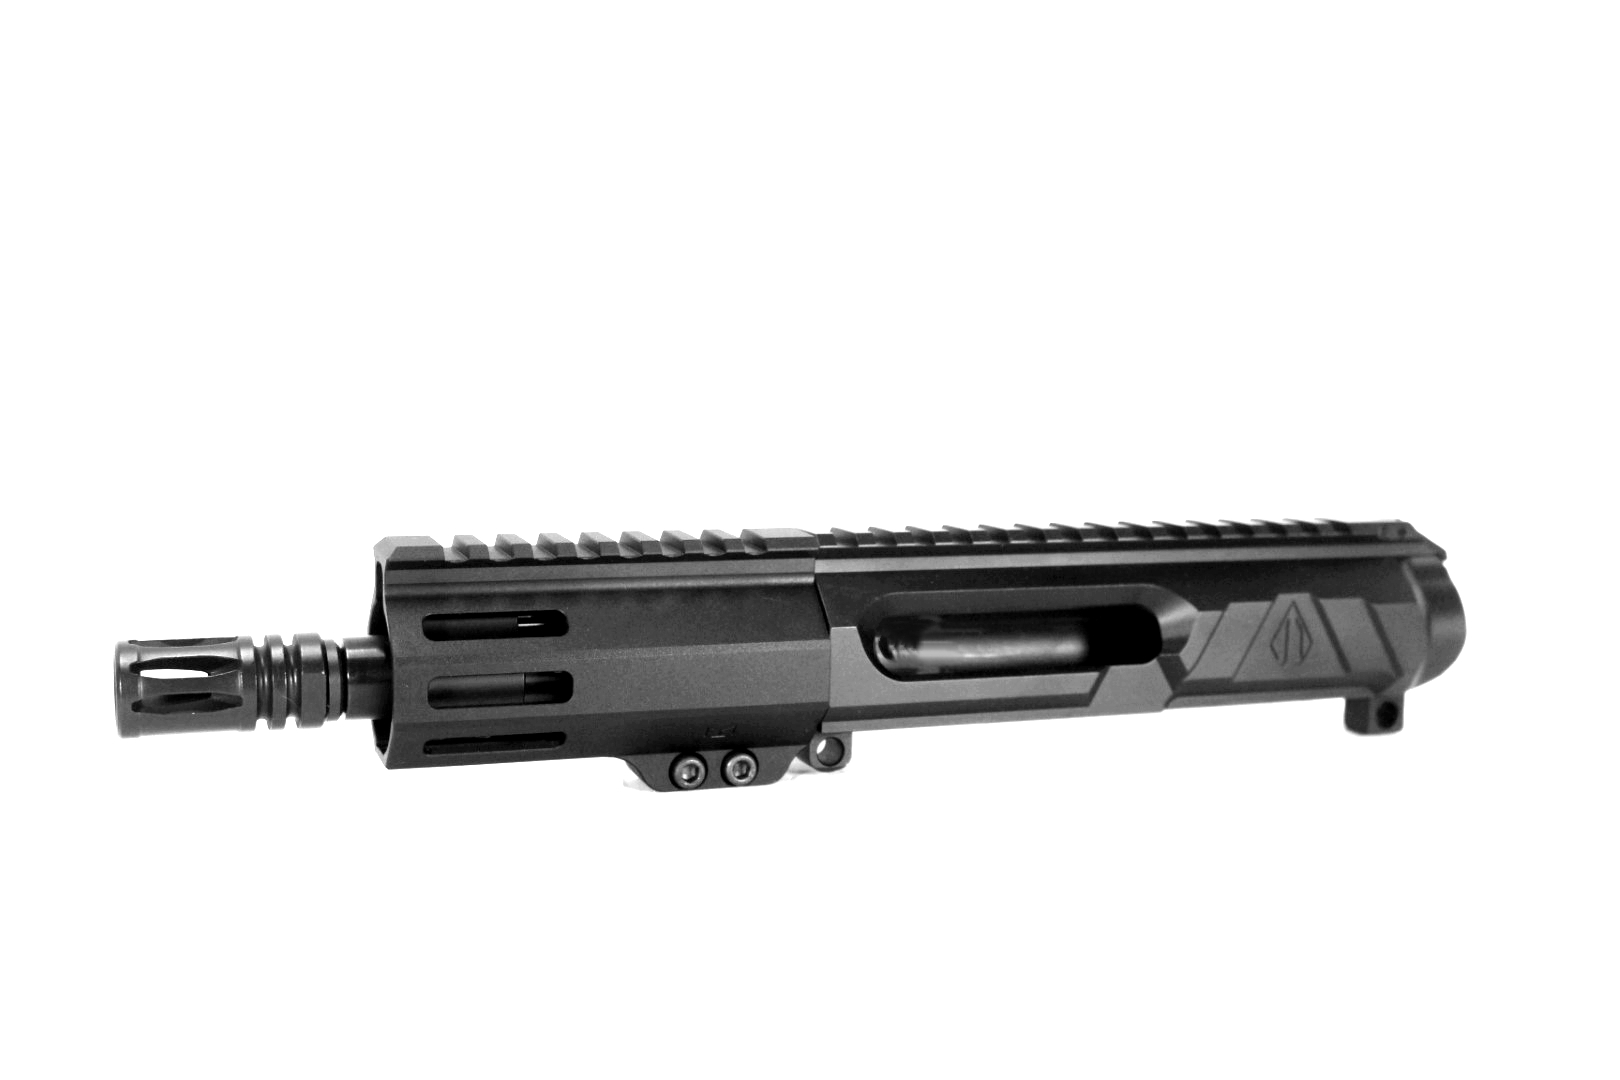 5 inch LEFT HANDED AR-15 NR Side Charging 5.56 NATO Melonite Upper Suppressor Ready | Pro2a Tactical